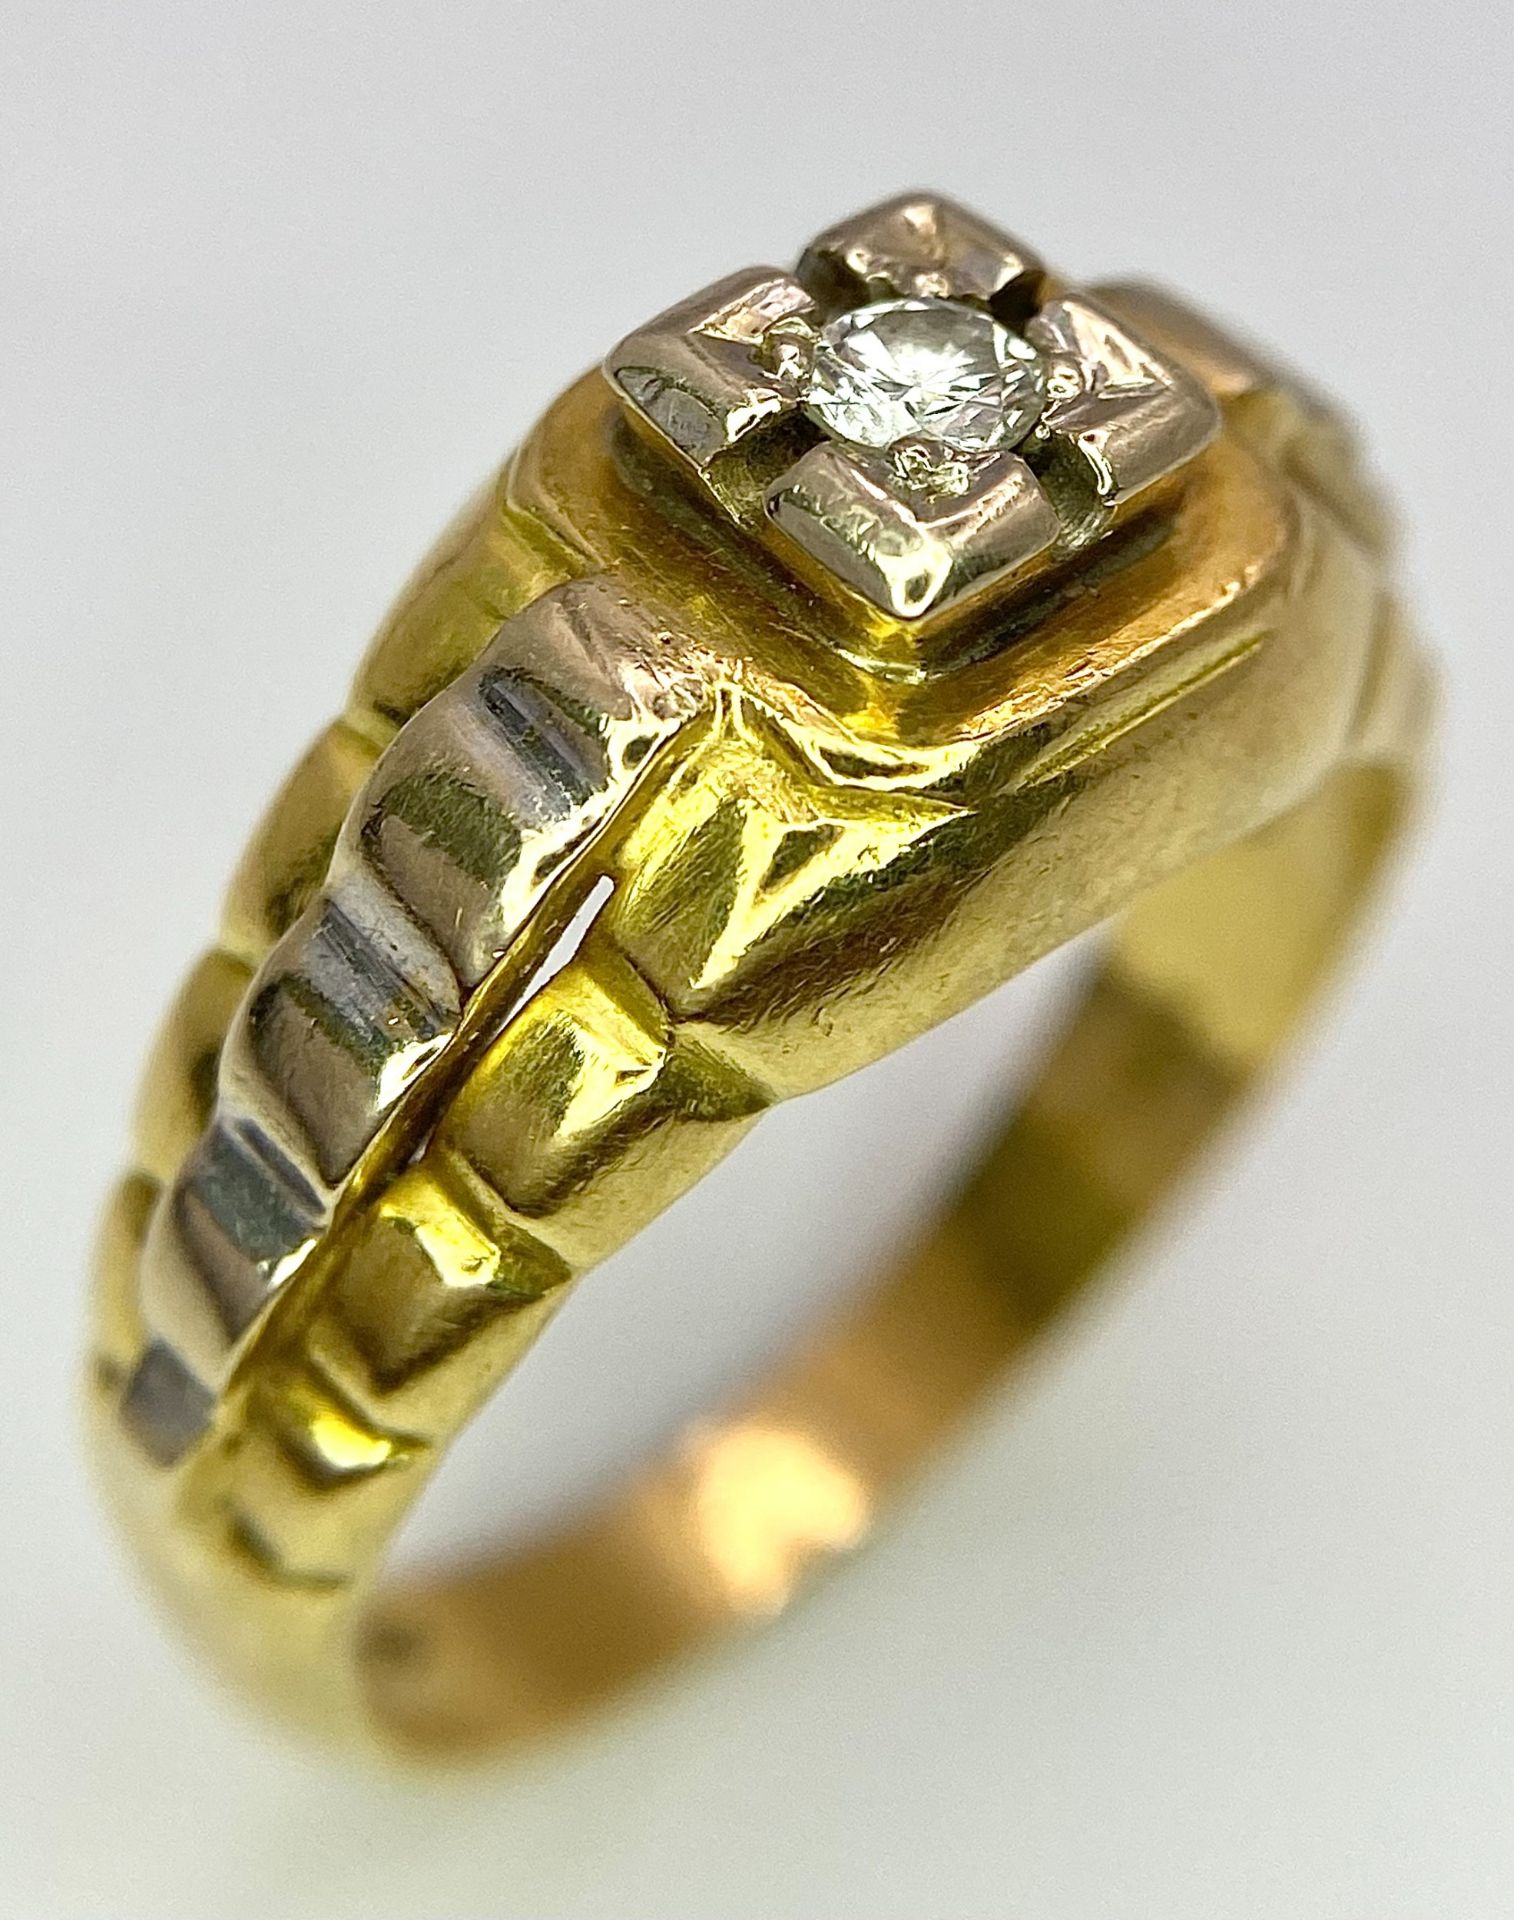 AN 18K TWO COLOUR ROLEX STYLE DIAMOND RING. 6.8G. SIZE P. - Image 3 of 10